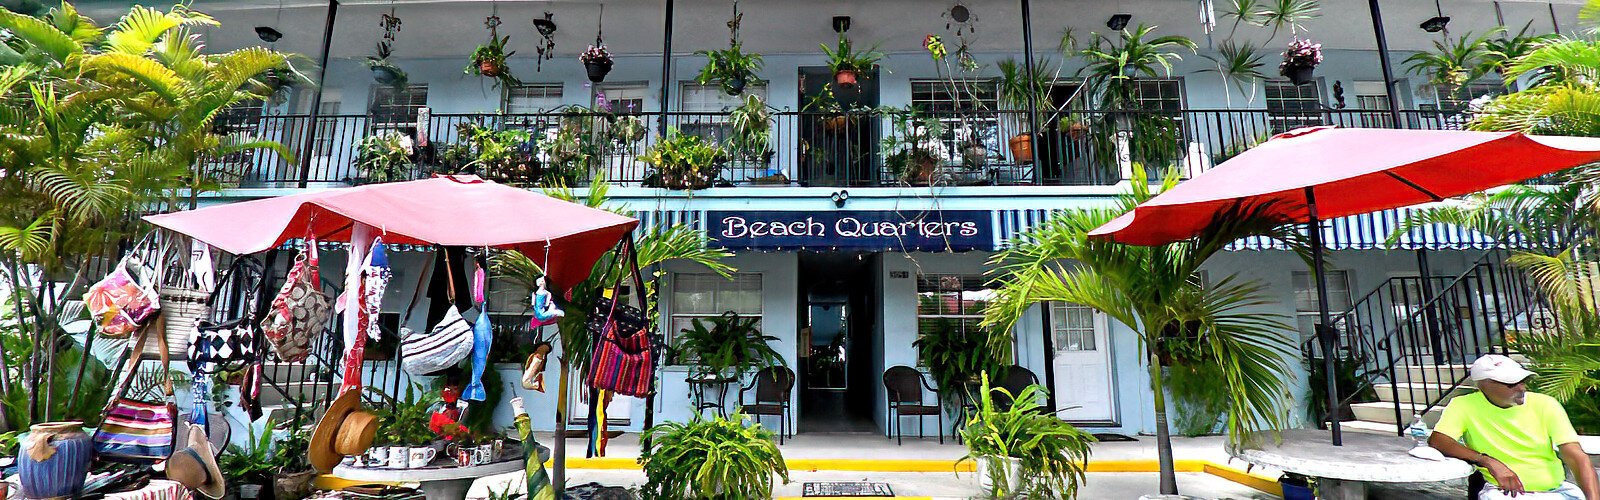 In the heart of Gulfport, the quaint Beach Quarters is the perfect location for tourists to stay  when they come to explore this quirky beach town.